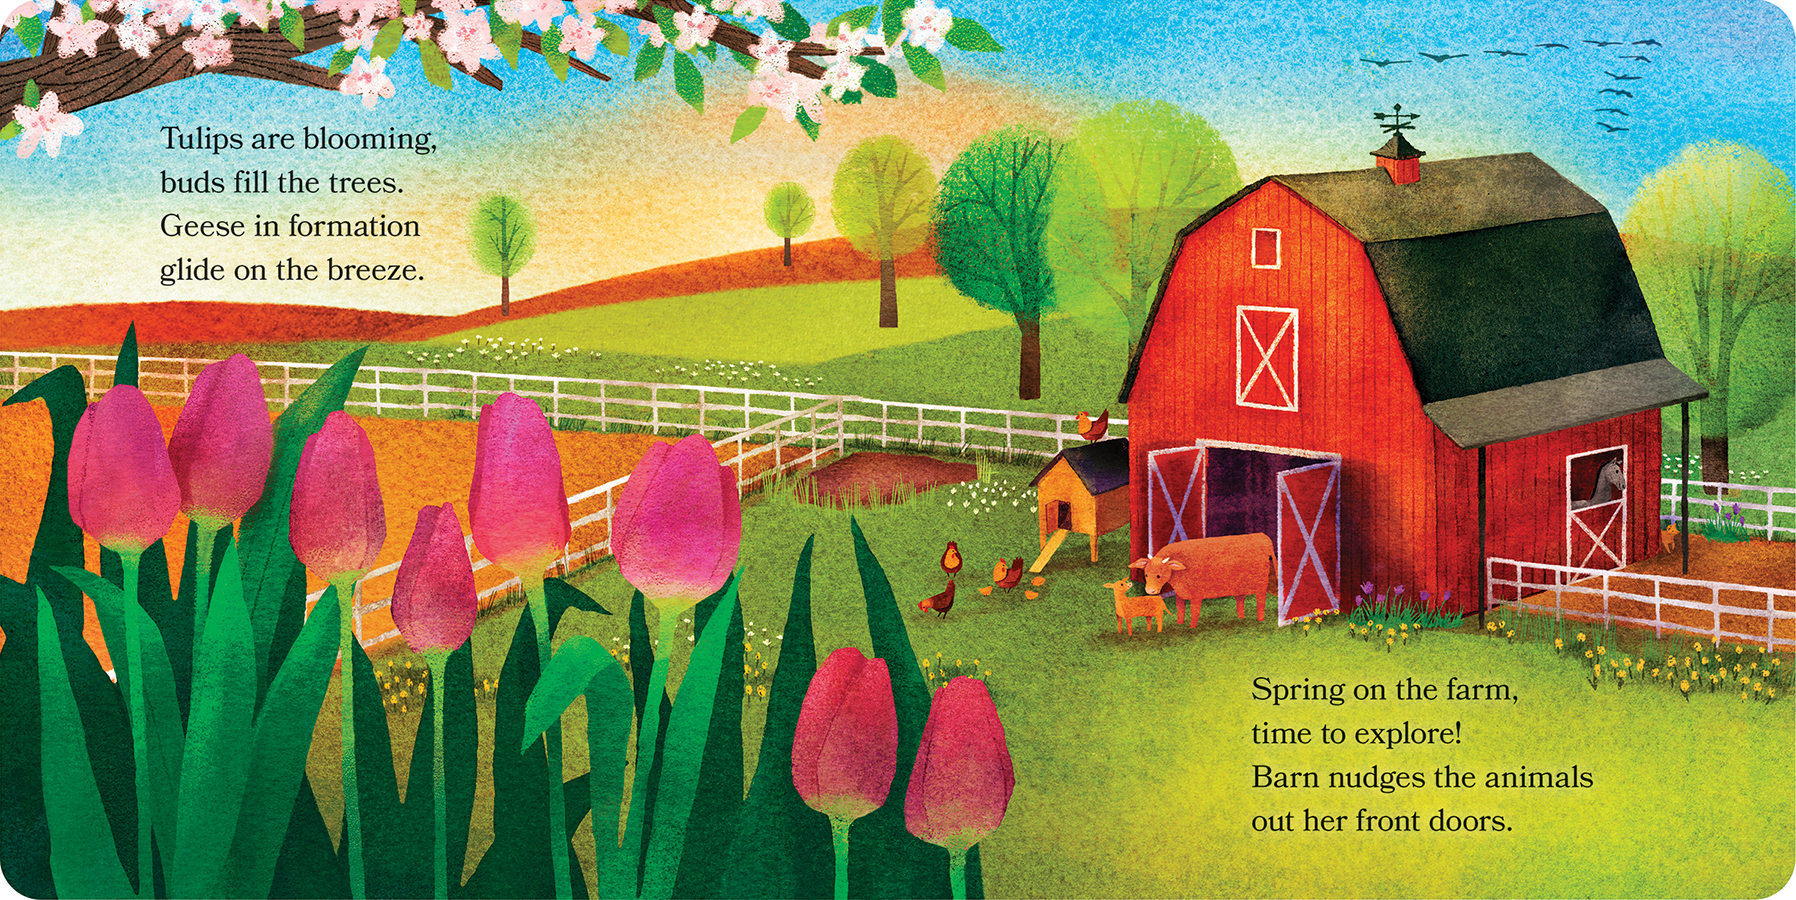 Barn in Spring: Out to Explore on the Farm